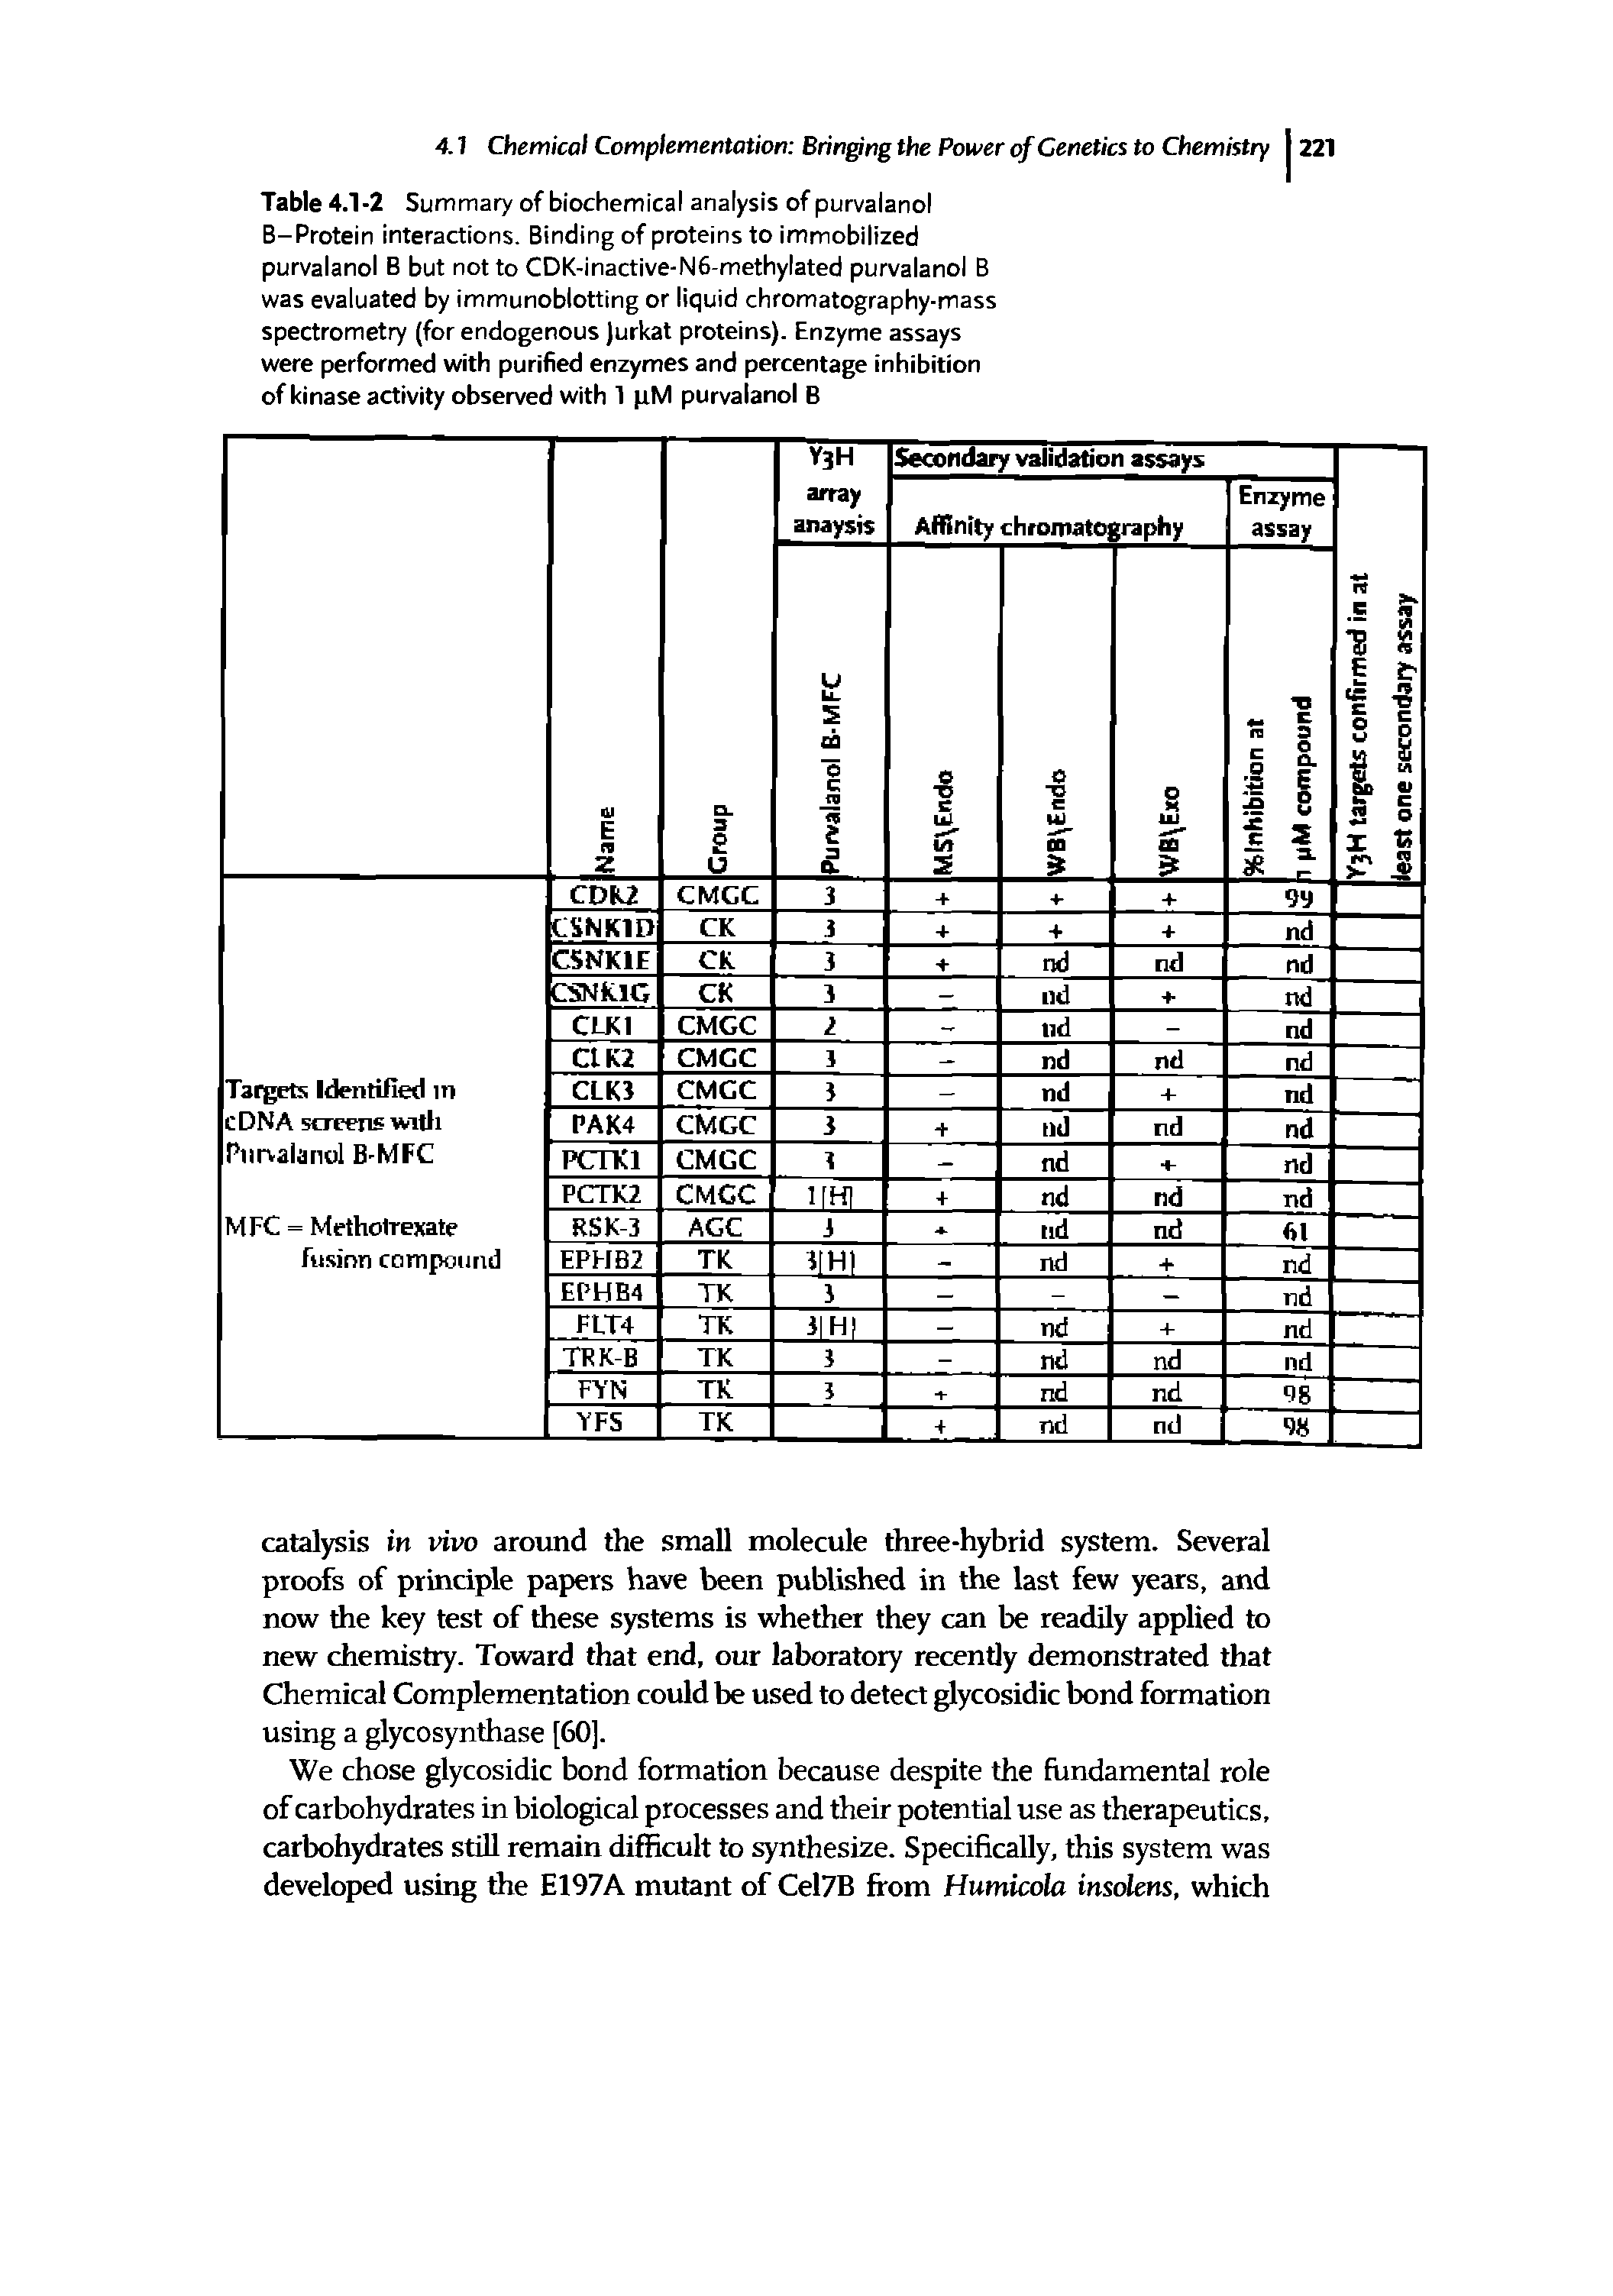 Table 4.1-2 Summary of biochemical analysis of purvalanol B-Protein interactions. Binding of proteins to immobilized purvalanol B but not to CDK-inactive-N6-methylated purvalanol B was evaluated by immunoblotting or liquid chromatography-mass spectrometry (for endogenous jurkat proteins). Enzyme assays were performed with purified enzymes and percentage inhibition of kinase activity observed with 1 pM purvalanol B...